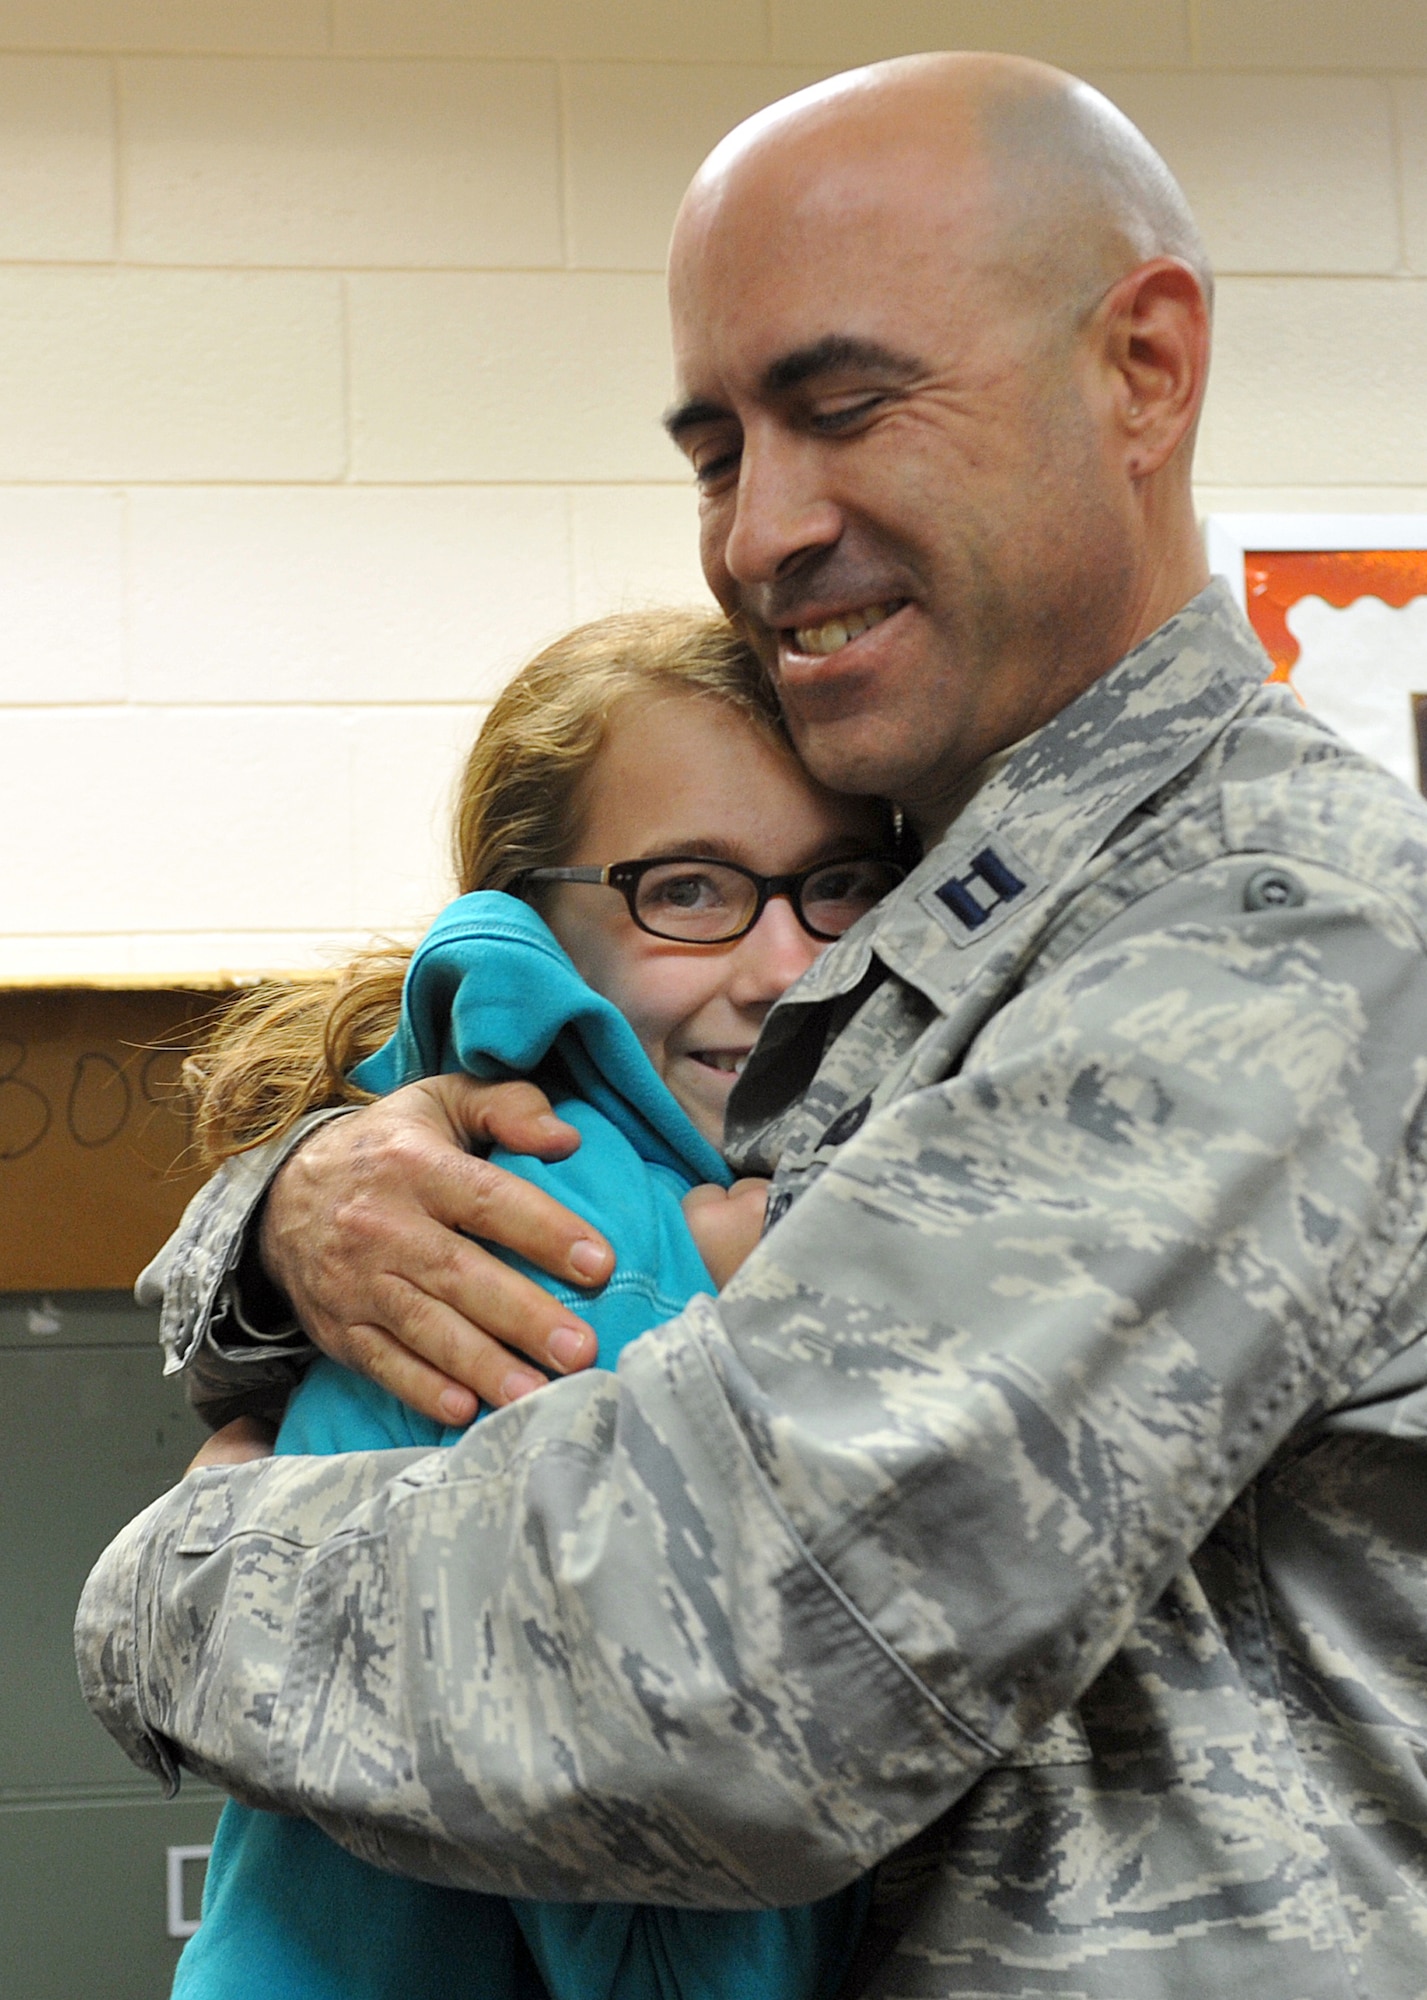 Chloe List gets a long-awaited hug from her father, Capt. Nathan List, during a surprise welcome home at Warner Robins Middle School in Warner Robins, Ga., Dec. 9. List ended his six-month deployment to Al Asad Air Base, Iraq, three weeks early, and with the help of the school staff was able to surprise Chloe in her classroom. List is assigned to the Headquarters Air Force Reserve Command Security Forces Directorate where he is the Chief of Contingency and Readiness Plans. (U.S. Air Force photo/Tommie Horton)